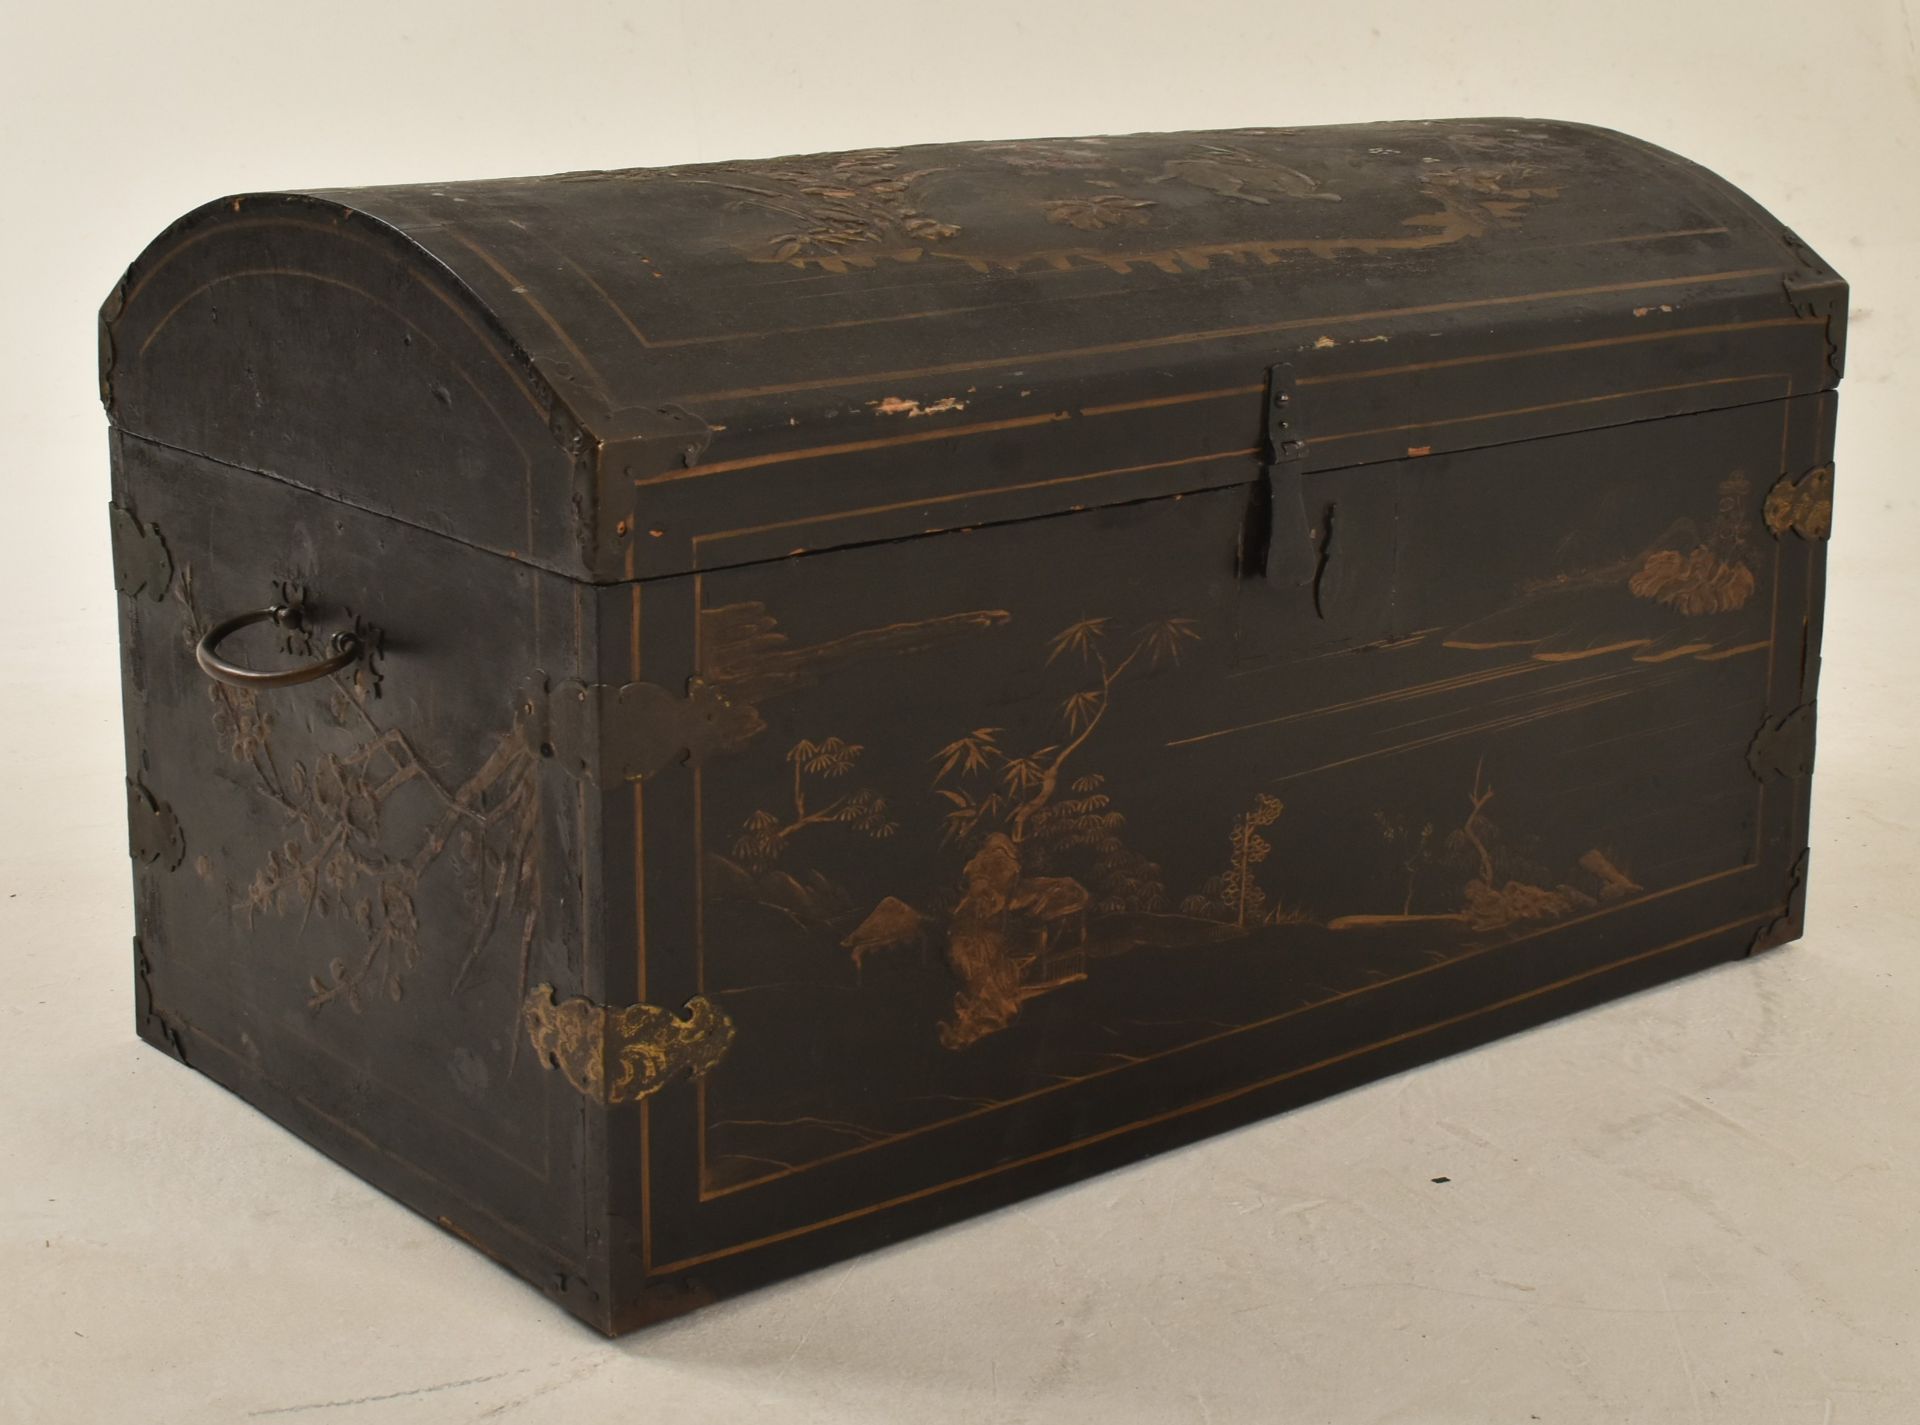 QING DYNASTY WOODEN LACQUERED STORAGE CHEST 清 富贵木宝箱